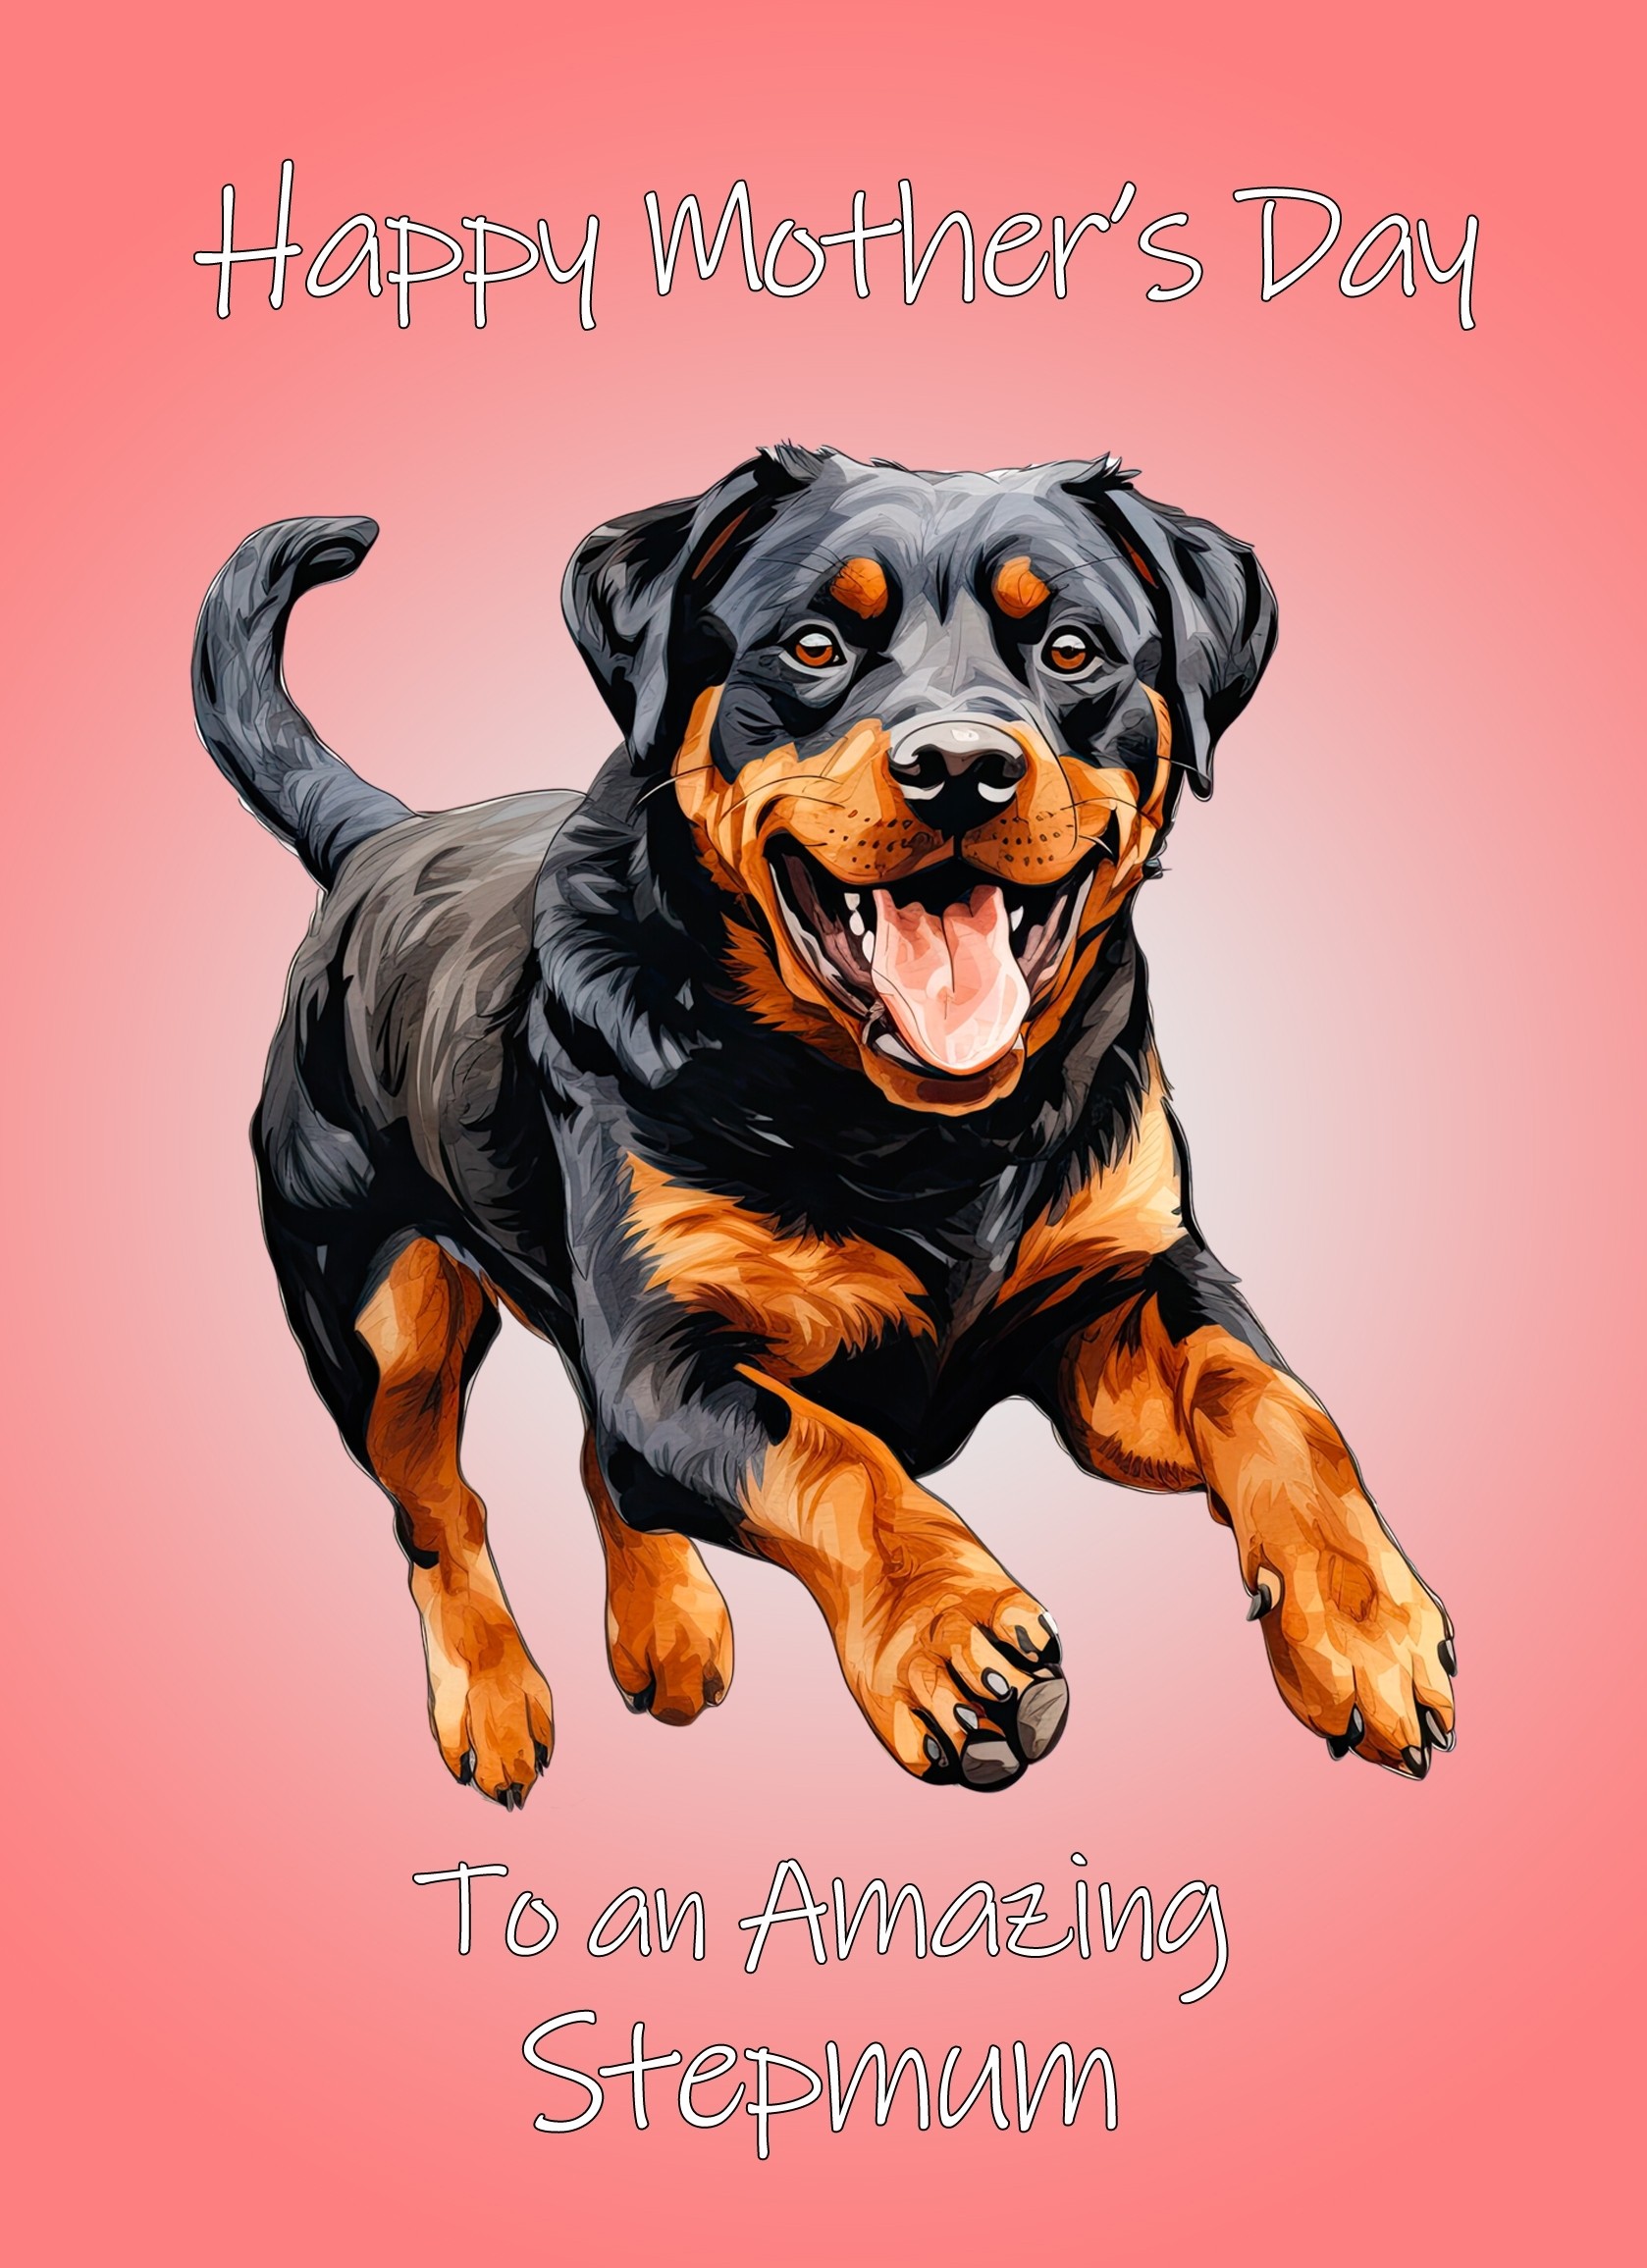 Rottweiler Dog Mothers Day Card For Stepmum